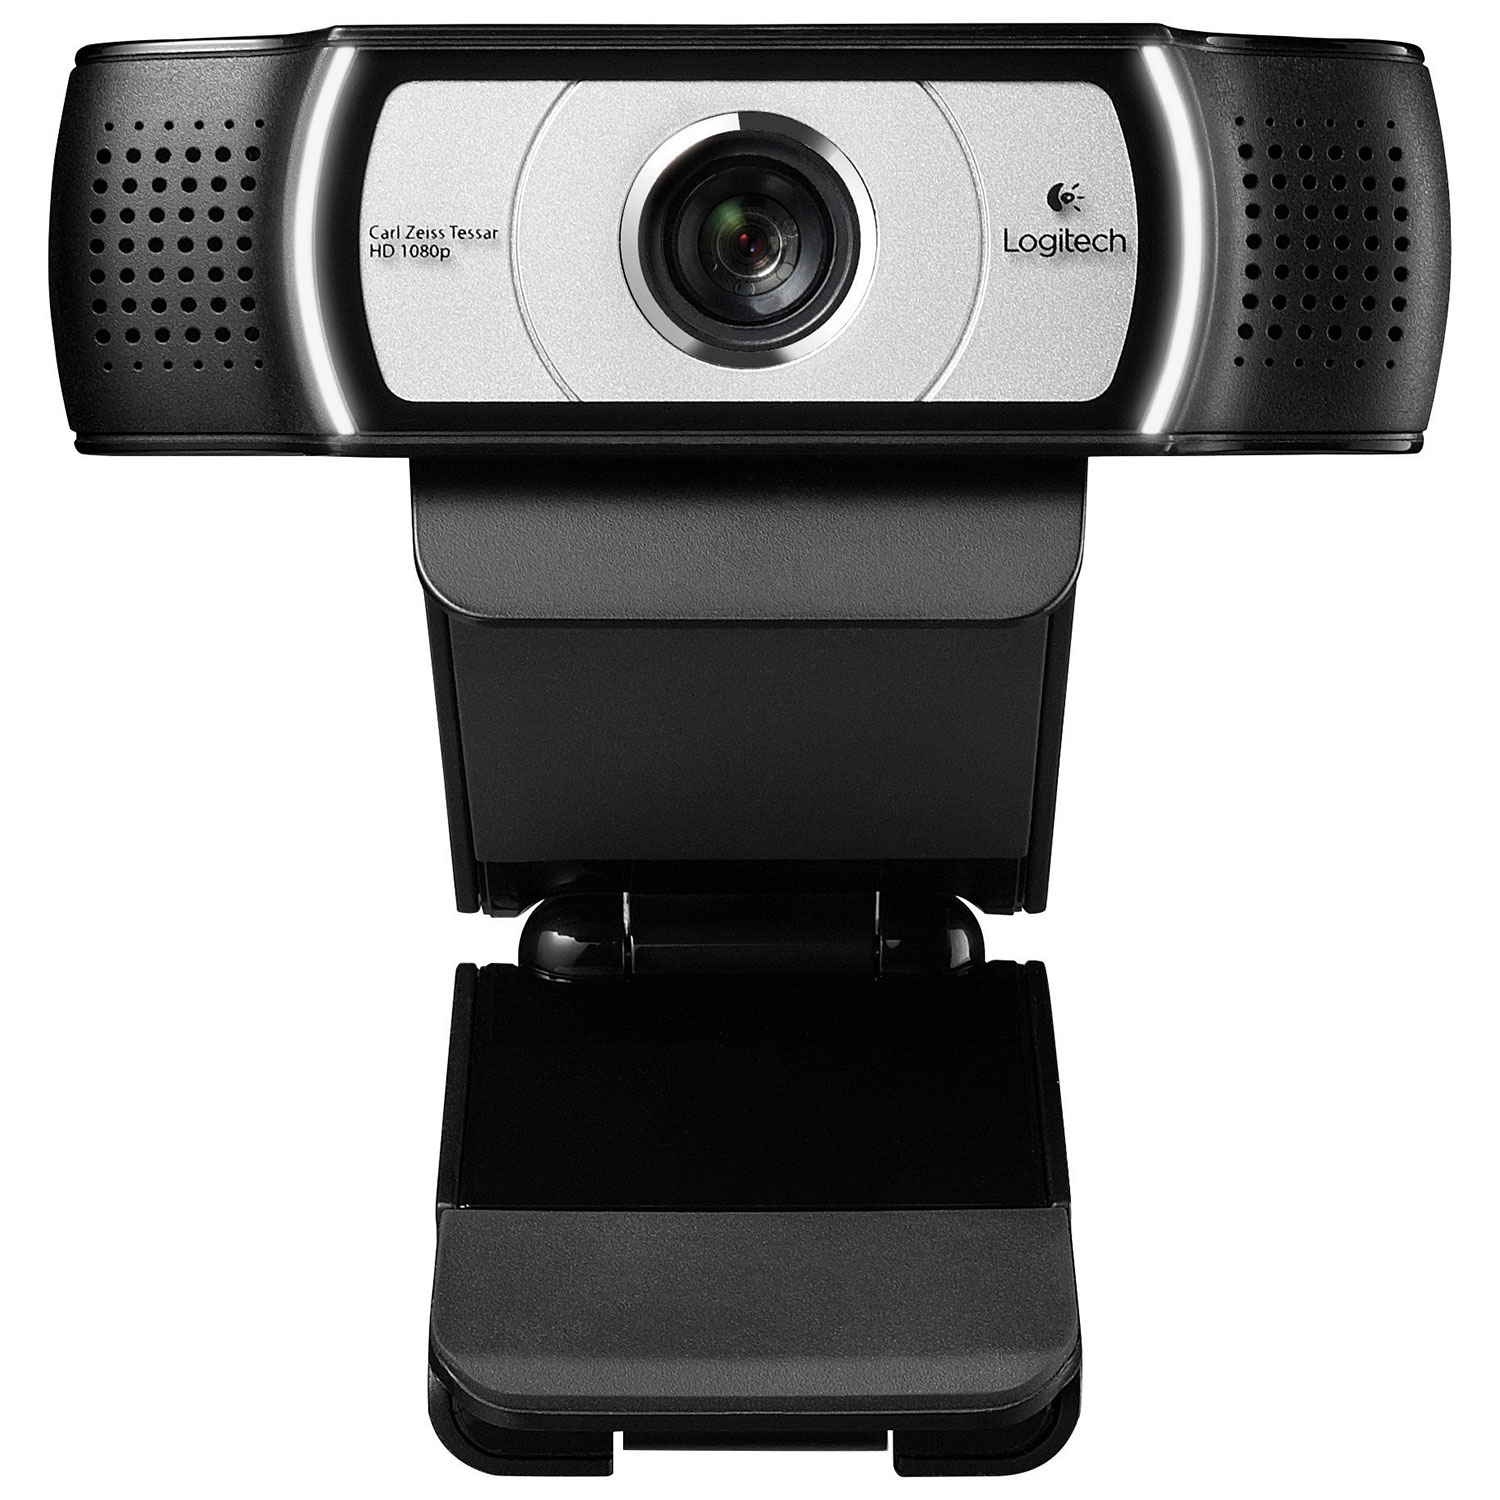 Logitech Pro HD 1080p Ultra-wide Angle Webcam with Built-in Microphone - Only at Best Buy